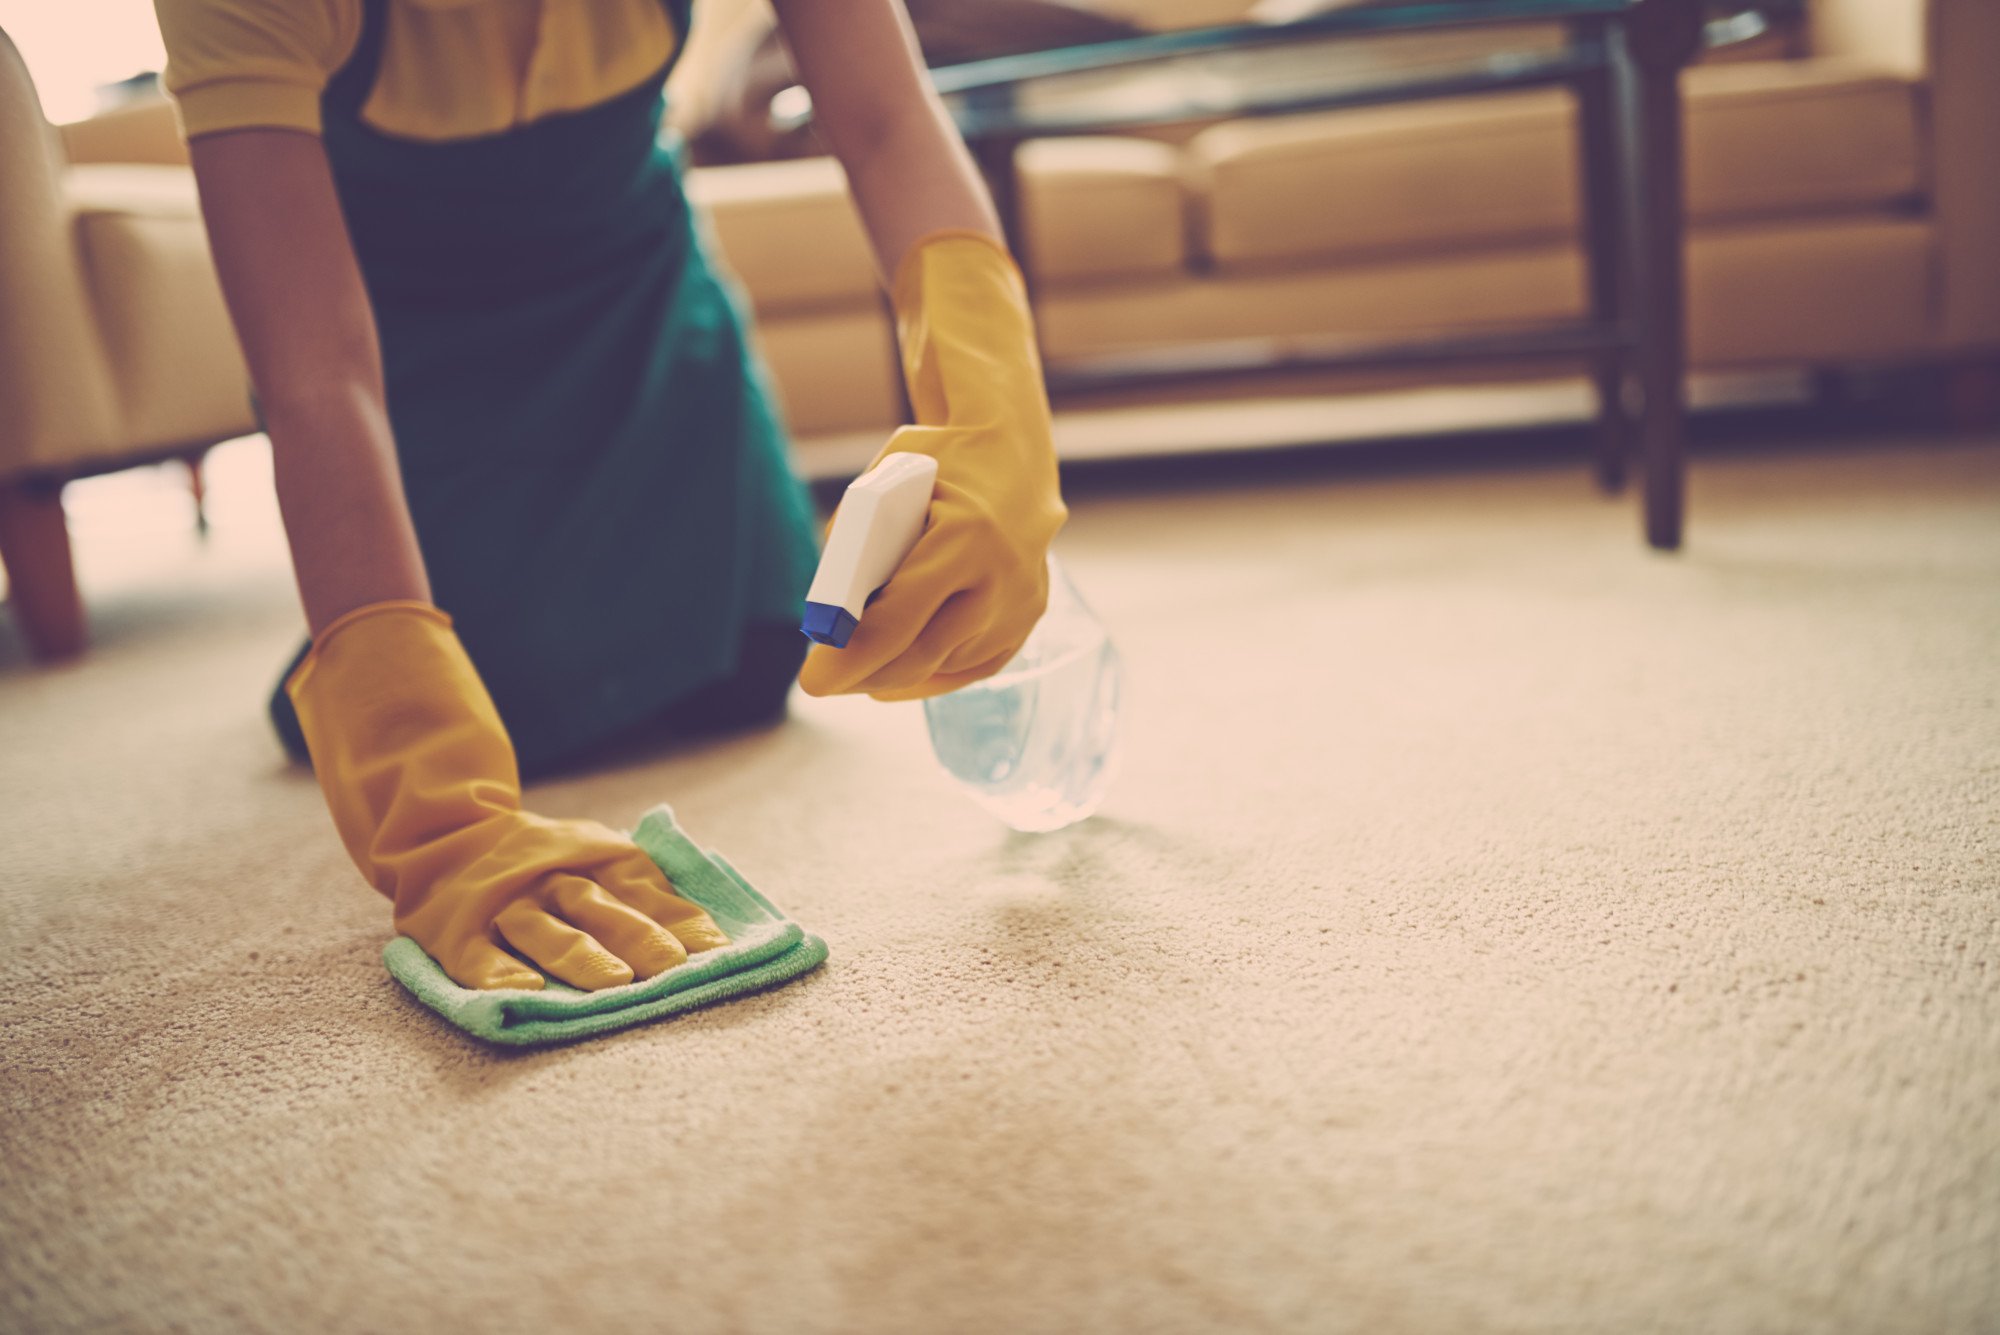 There's nothing that ruins a carpet faster than a stain. We take a look at the best carpet cleaning method to help get rid of stains quickly and effectively.